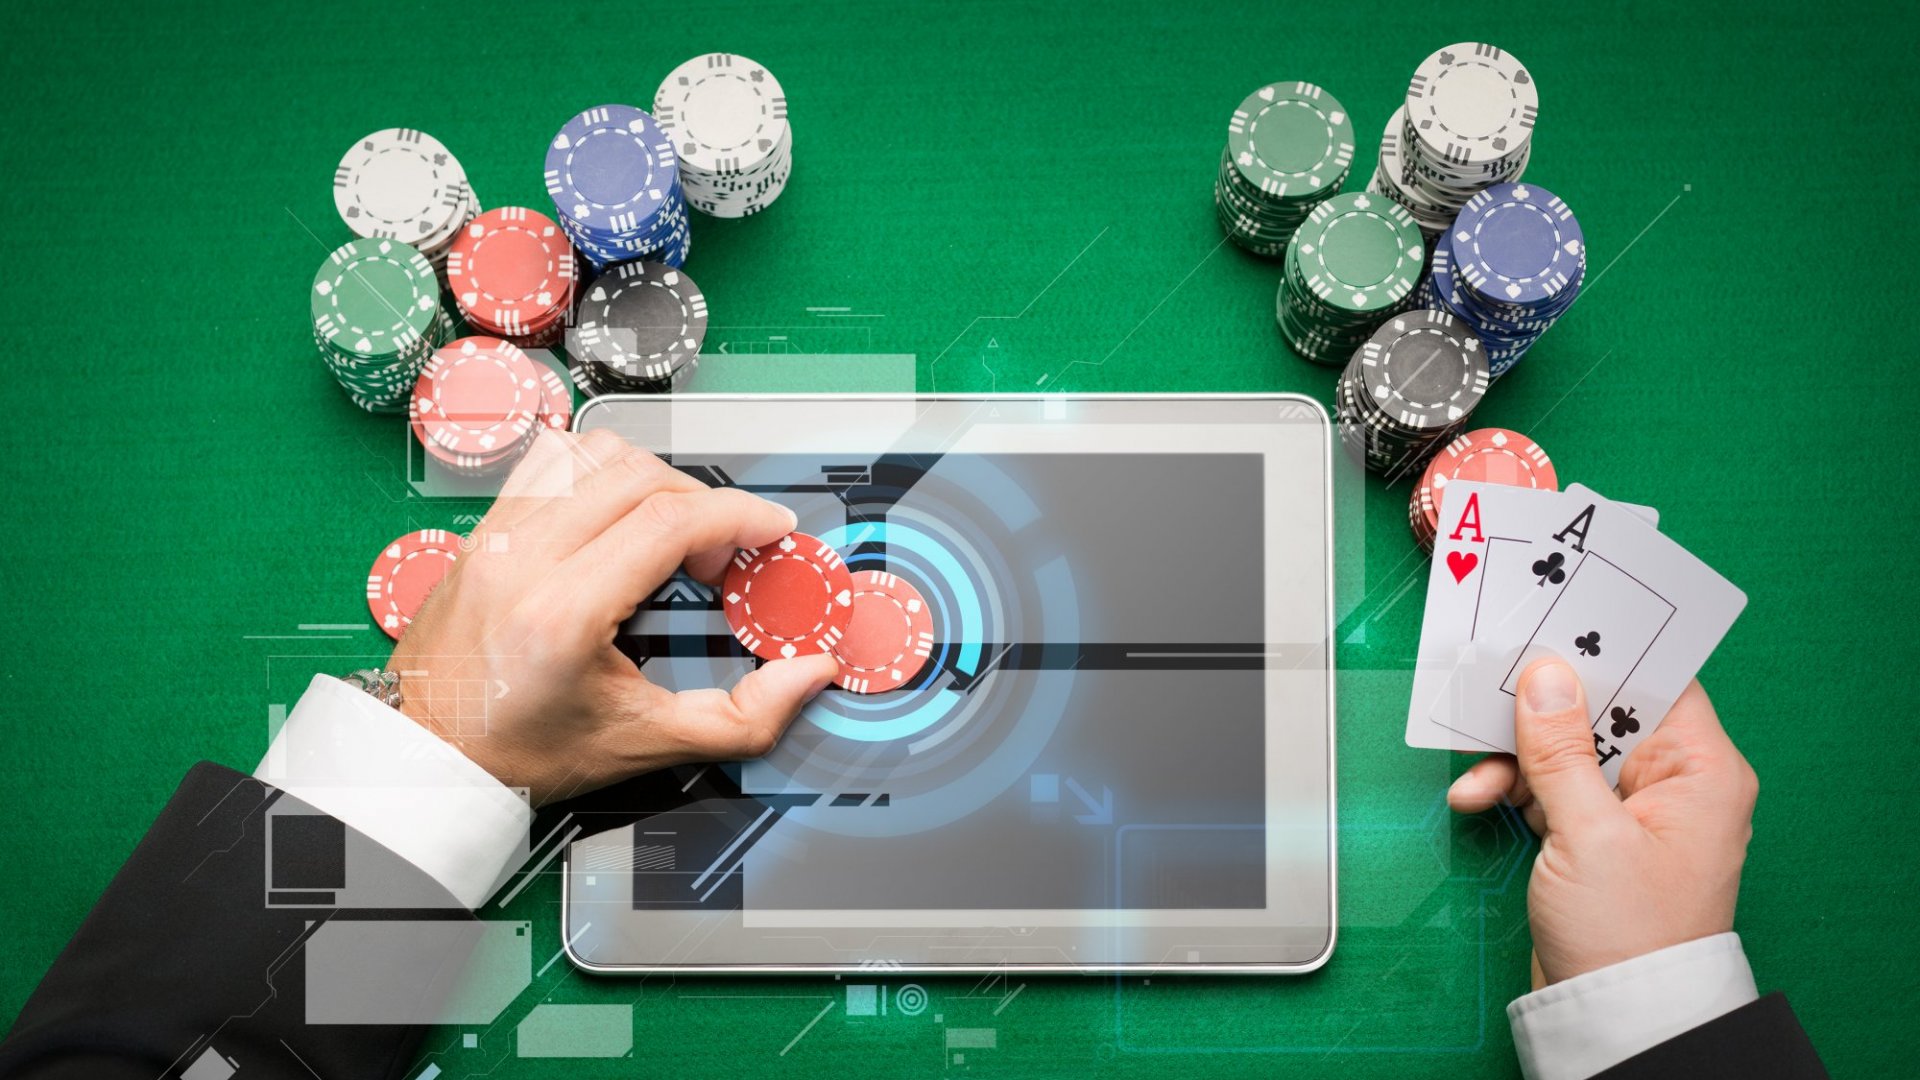 3 Key Tips to Staying Safe While Gambling Online